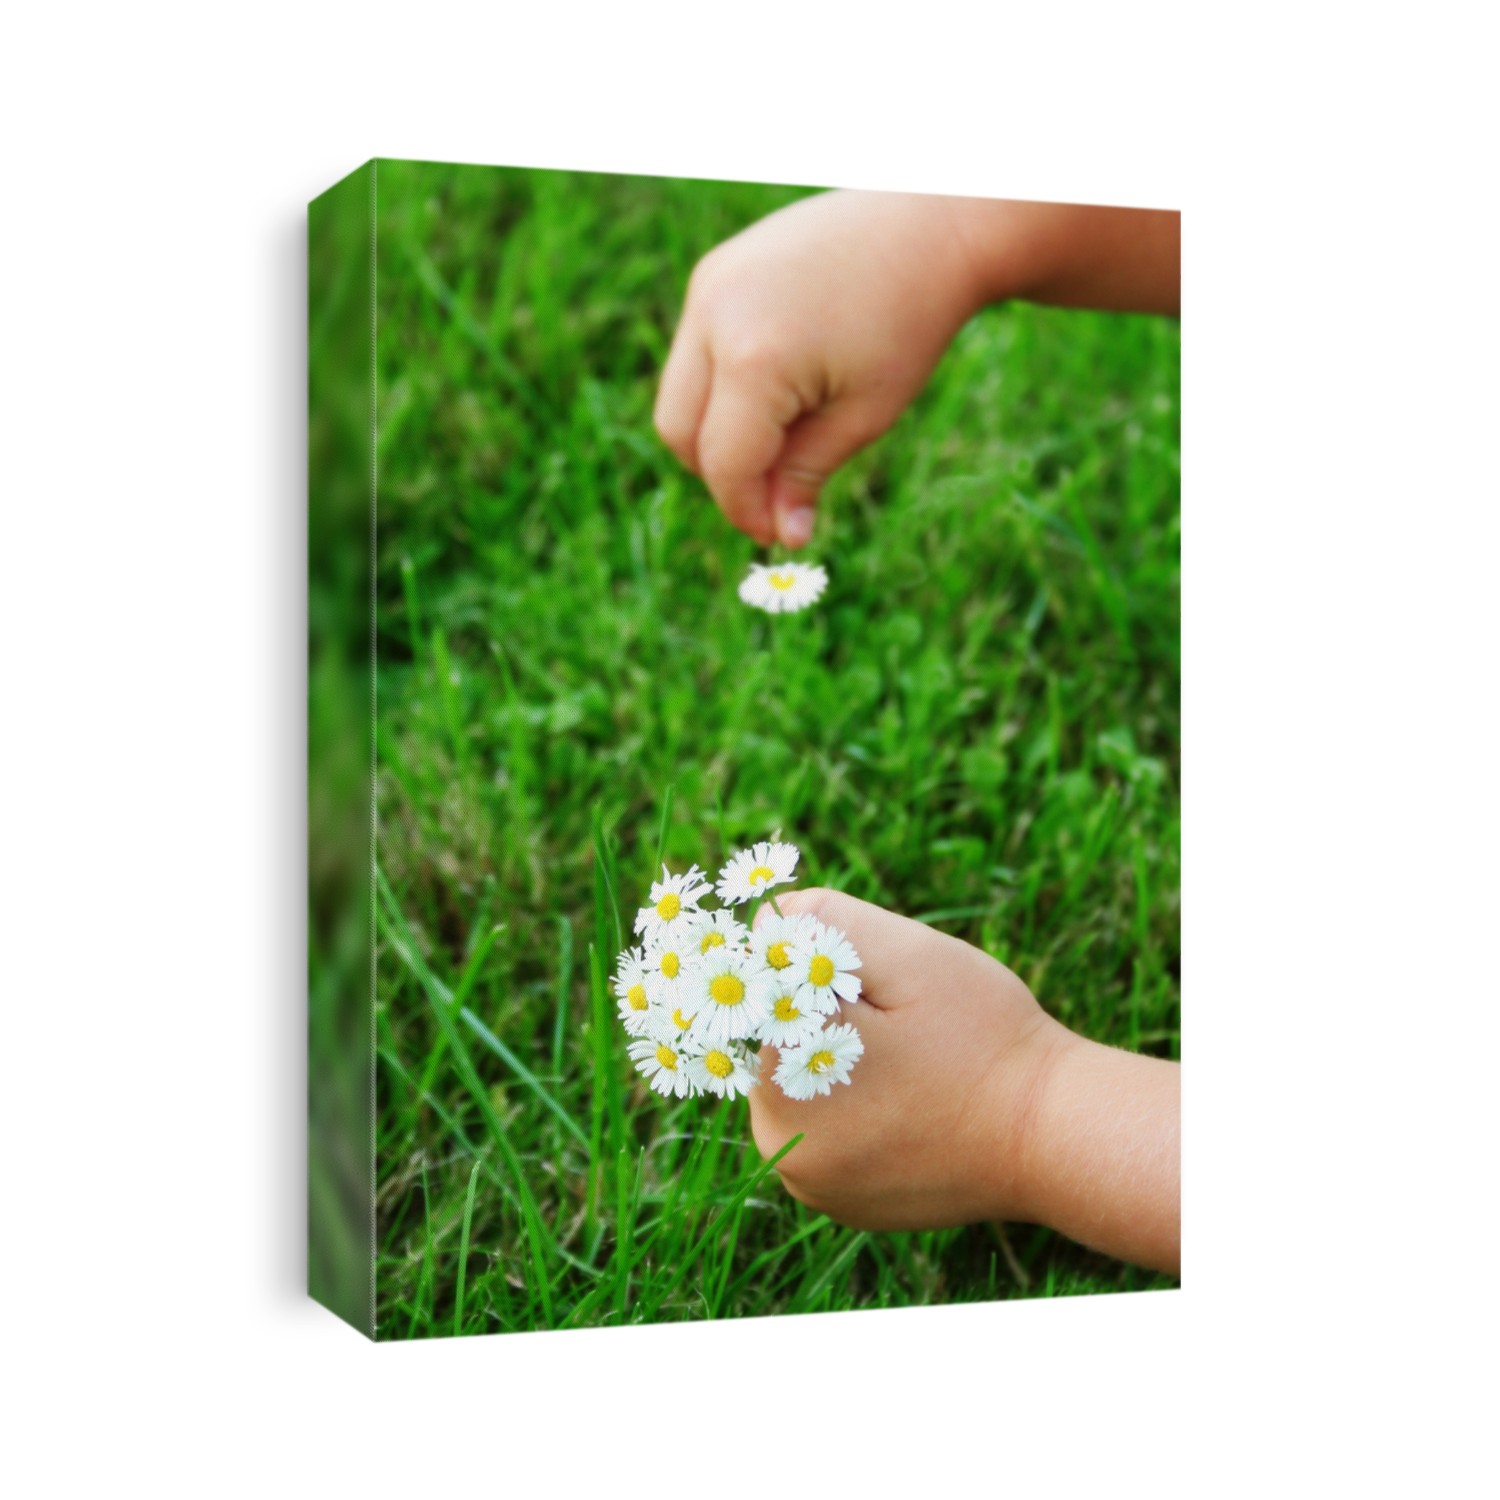 Close-up of child's hands picking up daisies